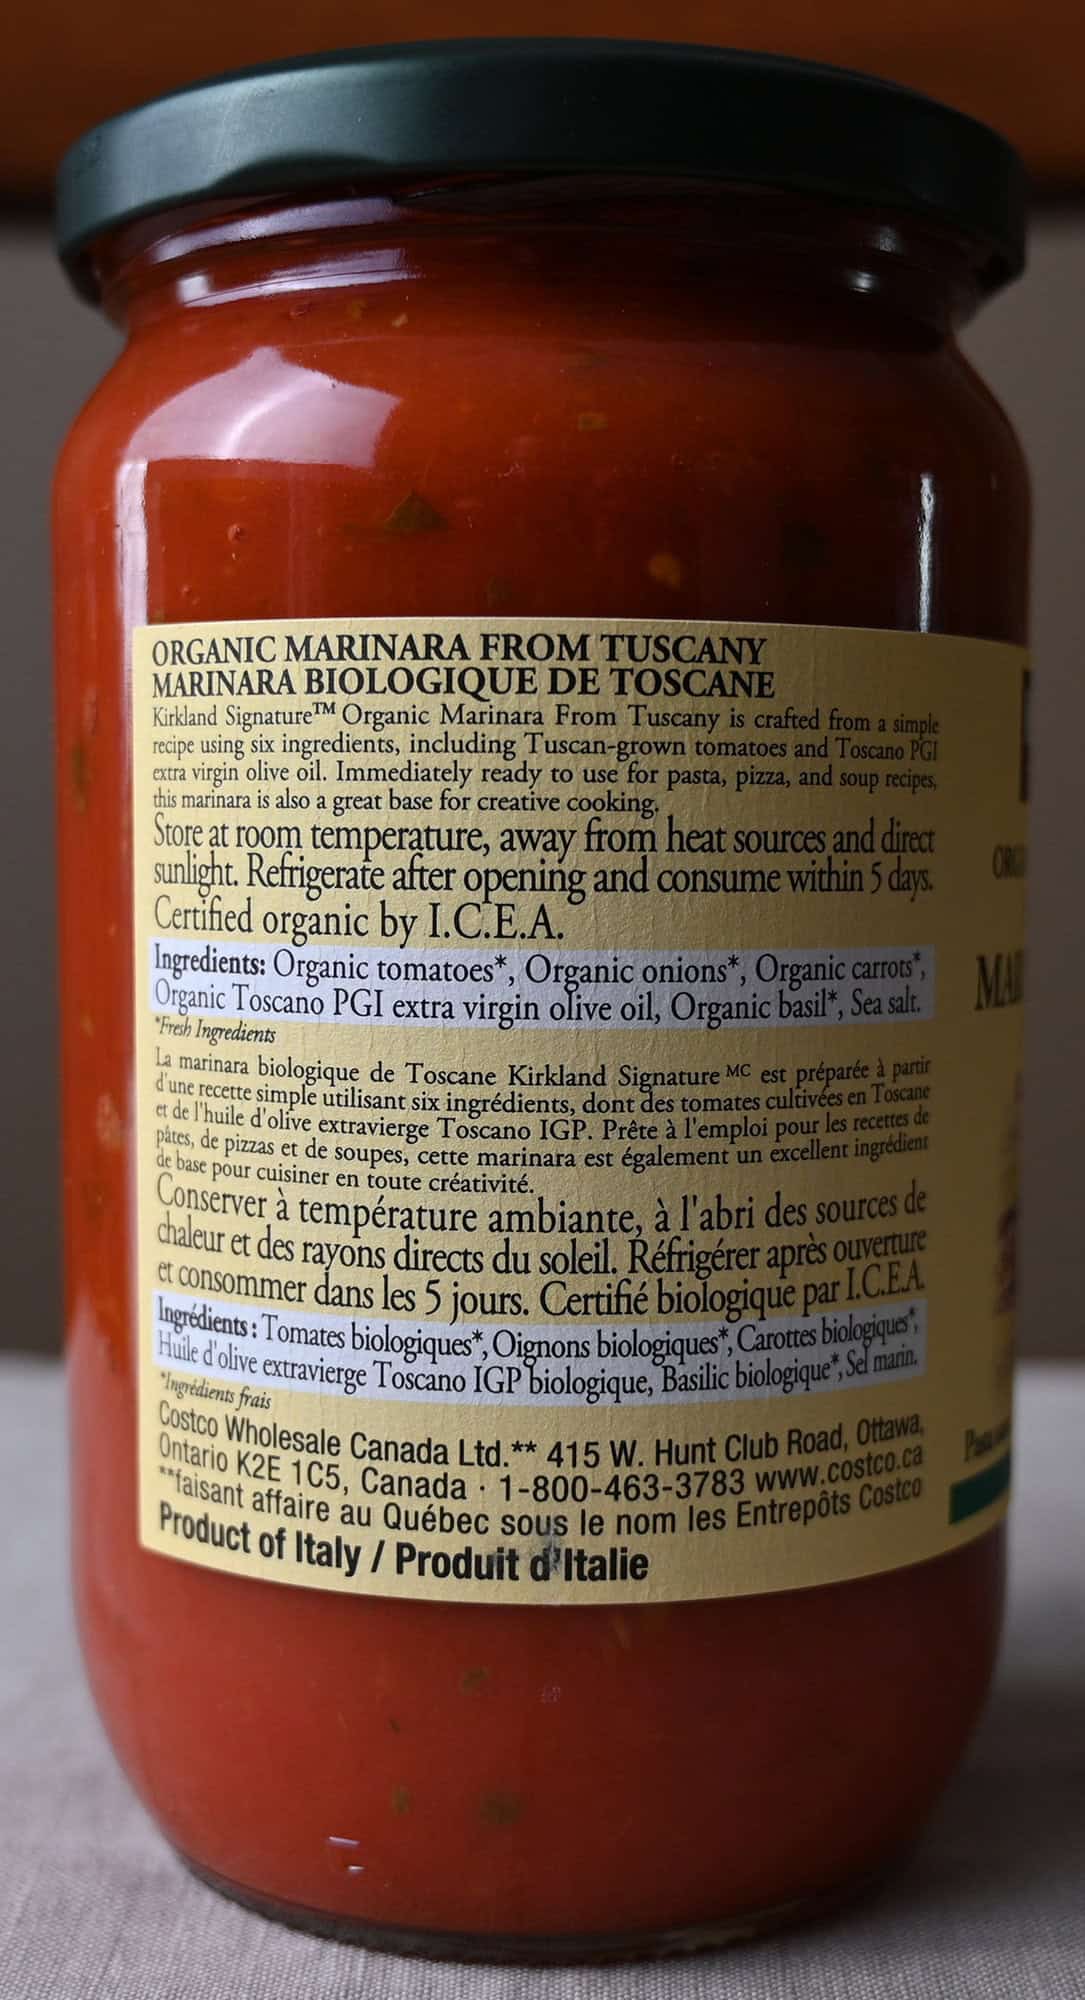 Image of the back of the jar of marinara showing ingredients, storage instructions and where it's made.